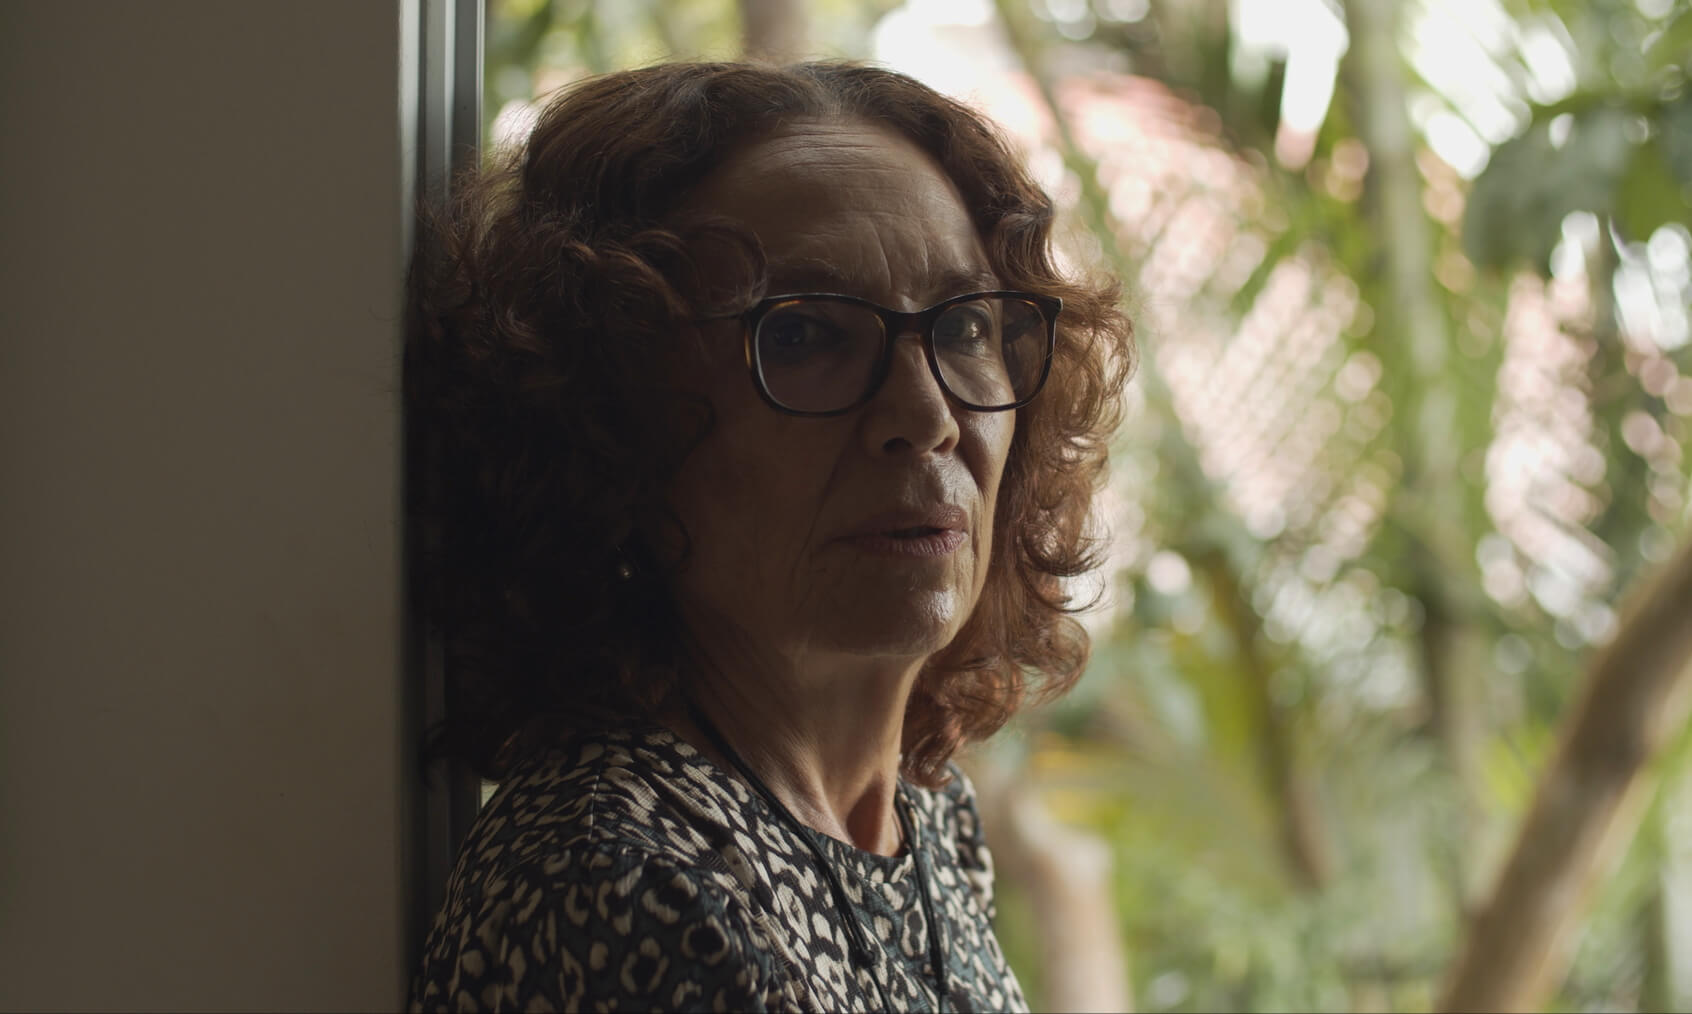 Close up of a woman leaning against the frame of a door, she has curly shoulder length hair and wears glasses